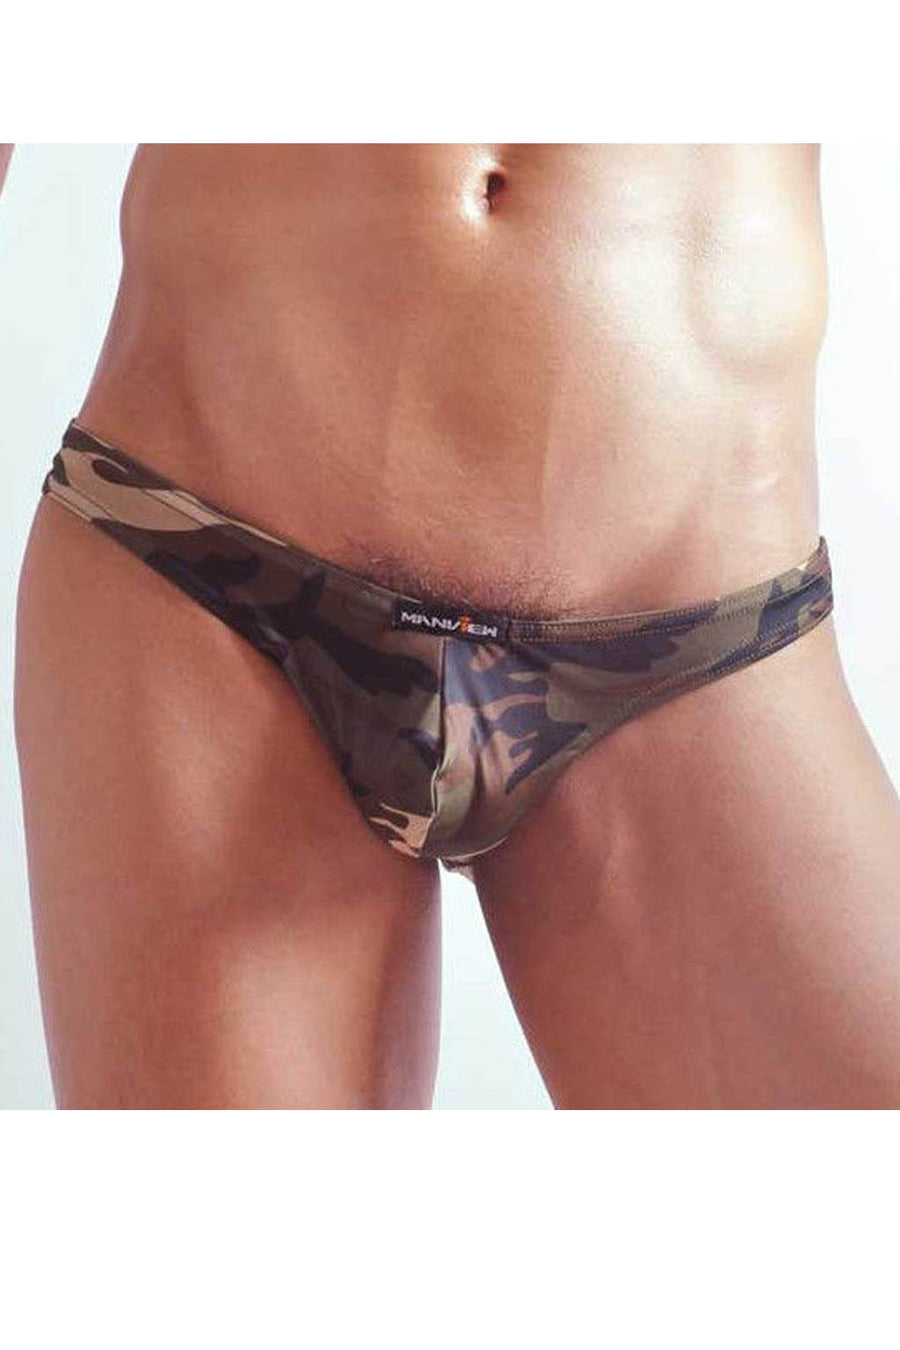 Manview Camouflage Pouch Thong Lowrise Underwear